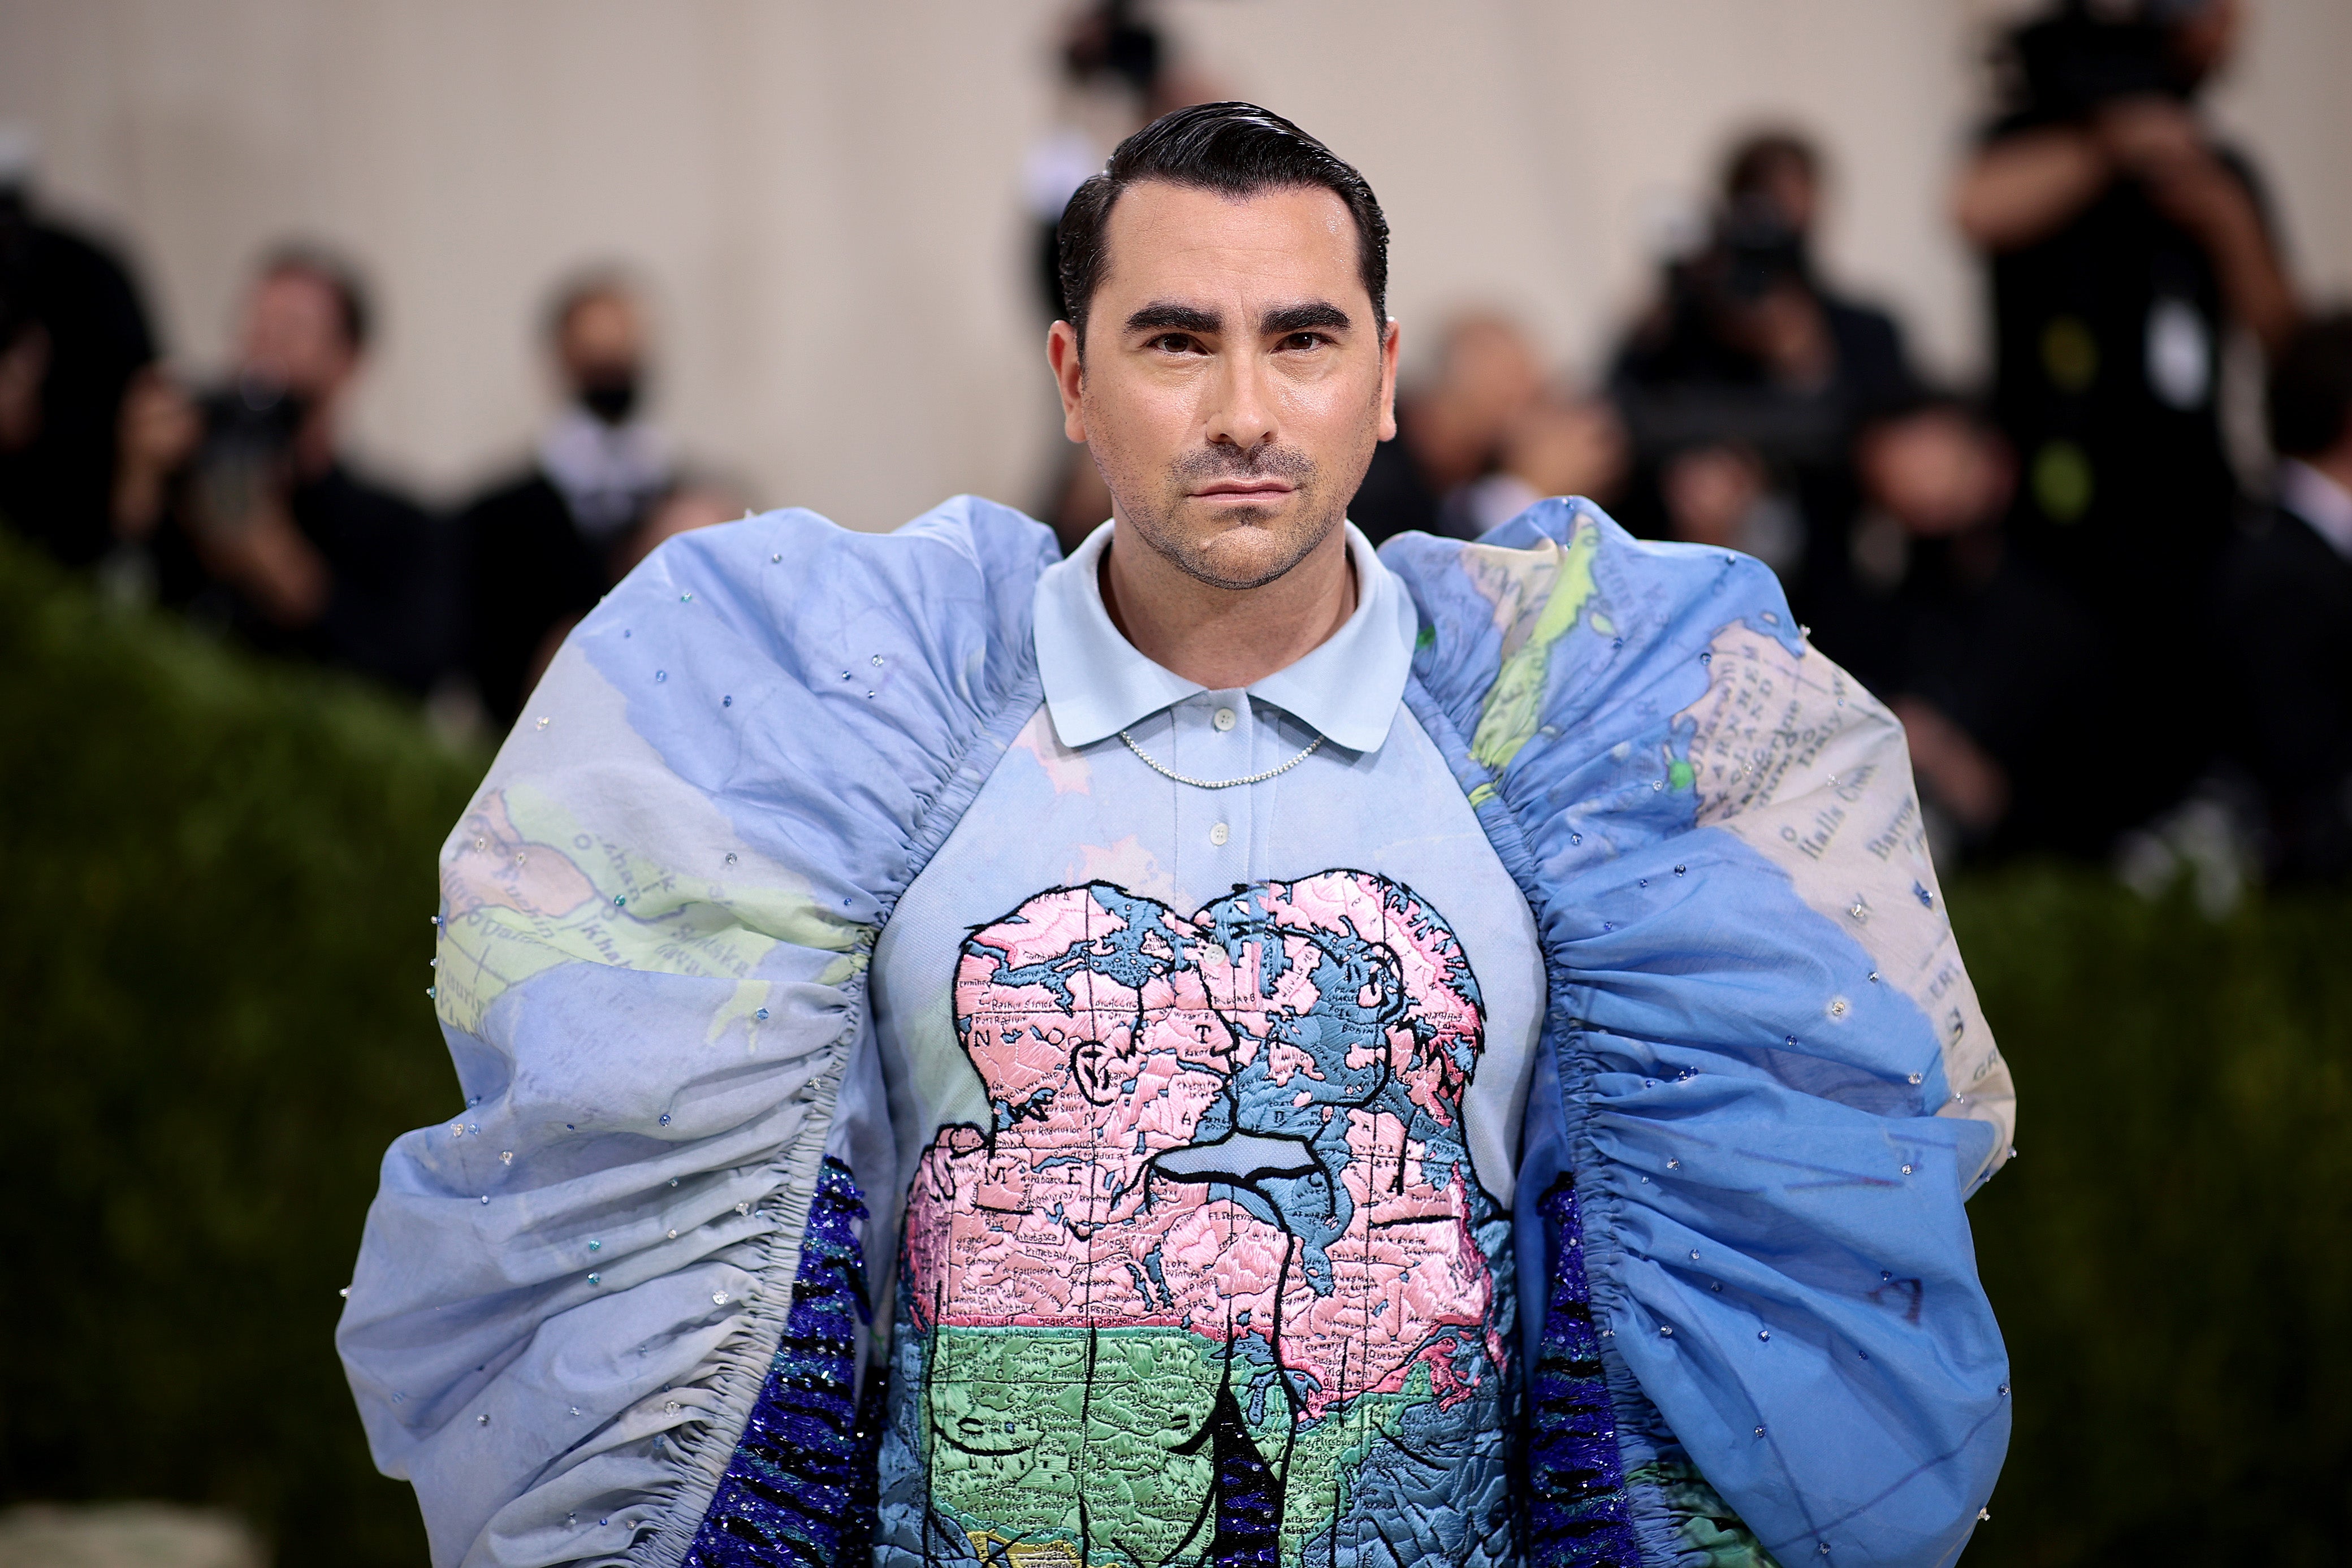 Dan Levy and Loewe’s Jonathan Anderson took inspiration from gay artist and AIDS activist David Wojnarowicz